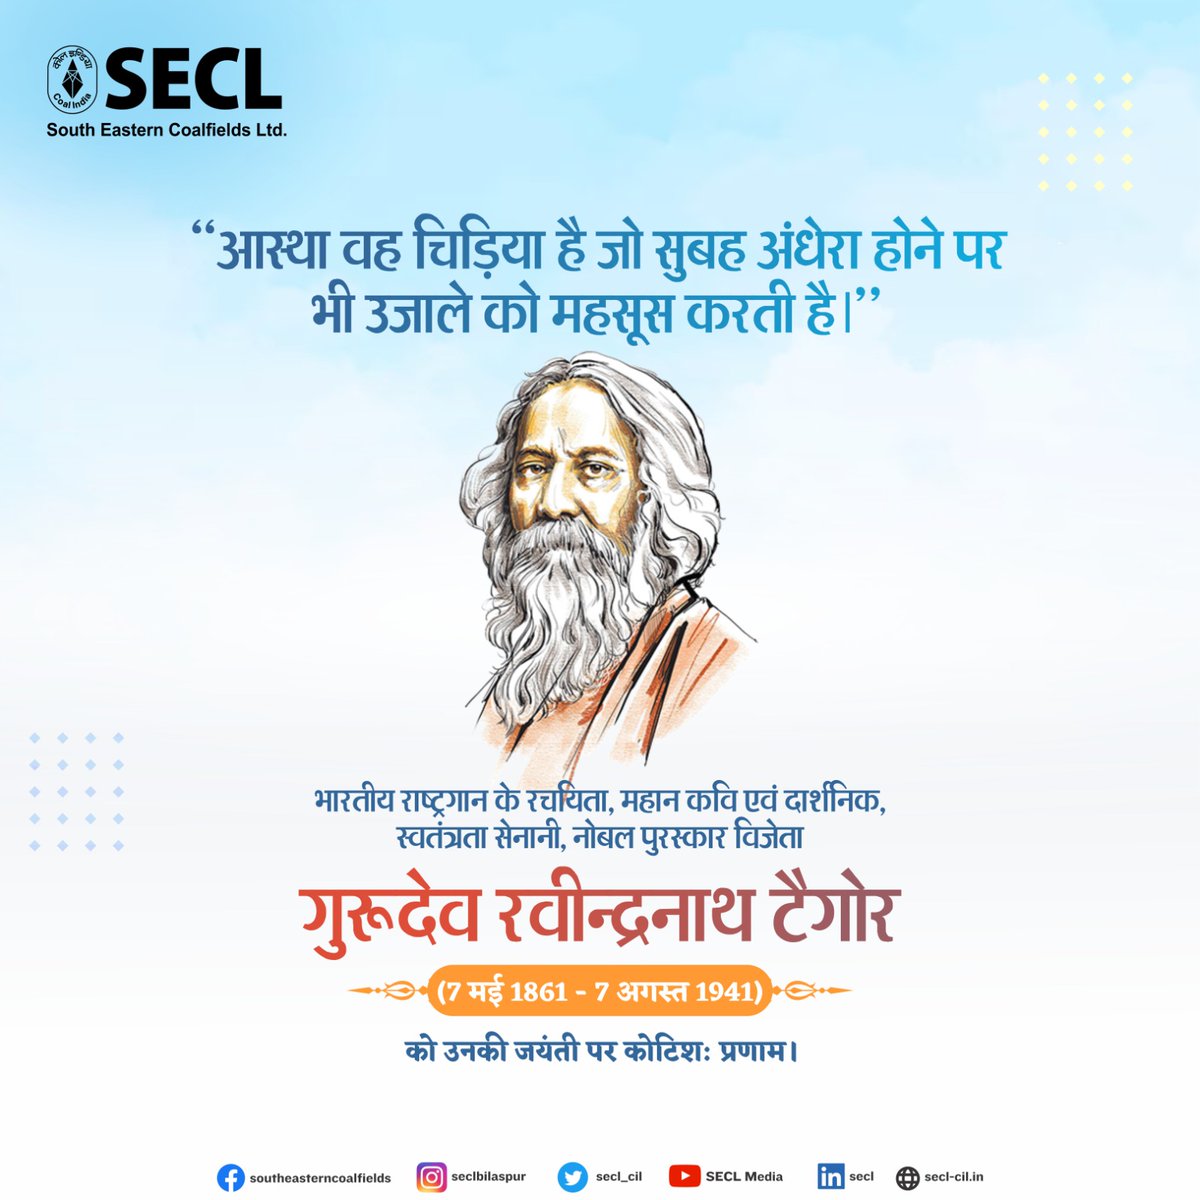 Tributes to the creator of the Indian national anthem, great poet and philosopher, freedom fighter, Nobel Prize winner Gurudev Rabindranath Tagore on his birth anniversary. @CoalMinistry @CoalIndiaHQ #teamsecl #rabindrajayanti